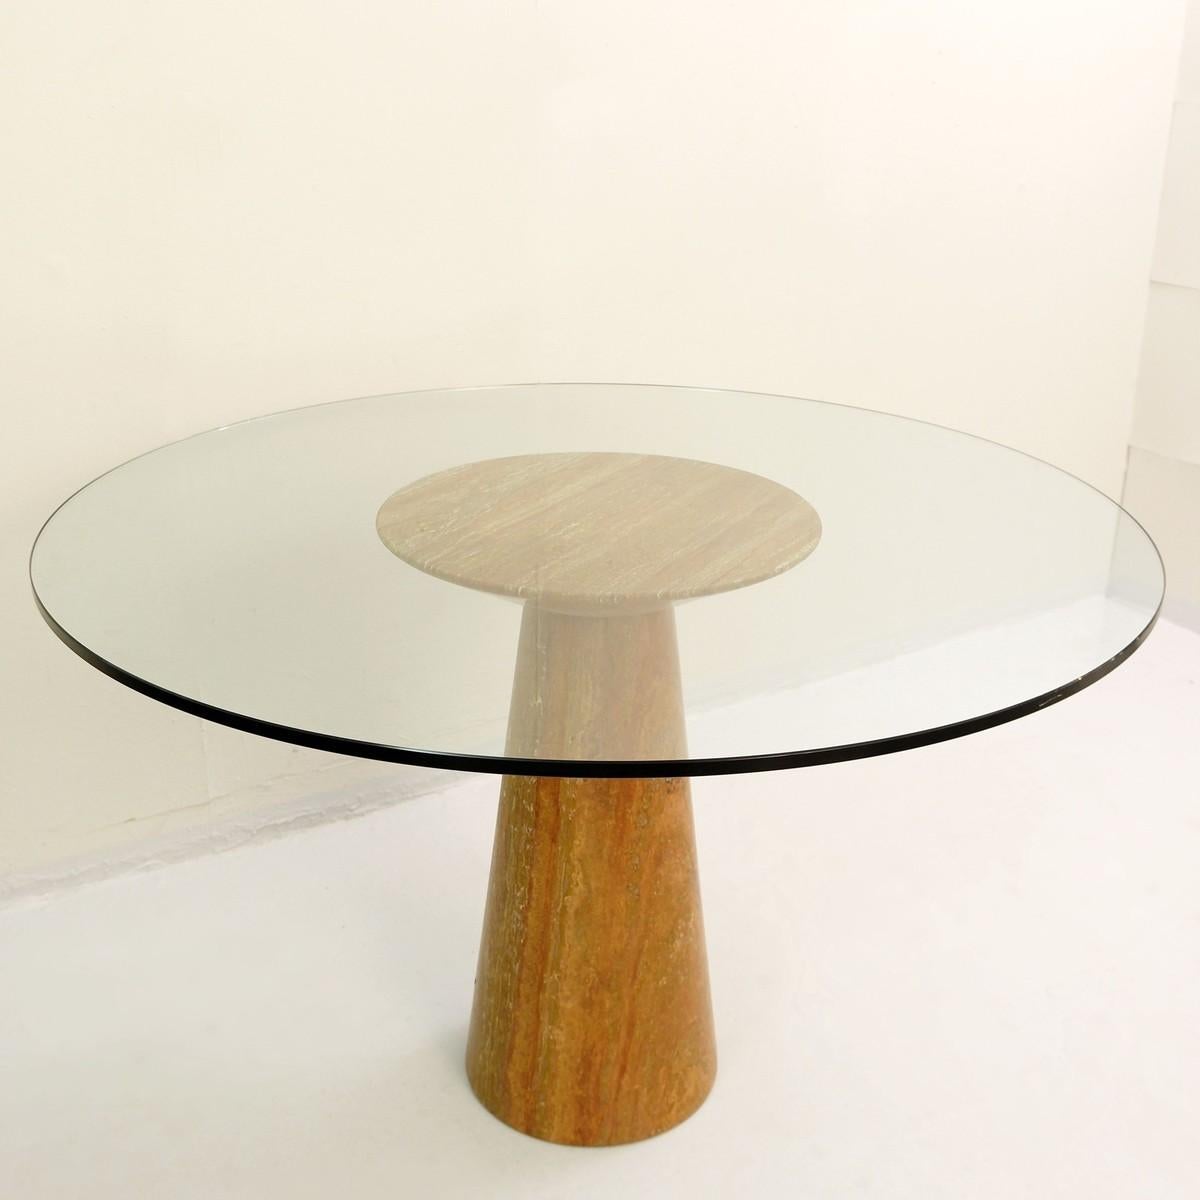 Angelo Mangiarotti red travertine and glass round dining table.